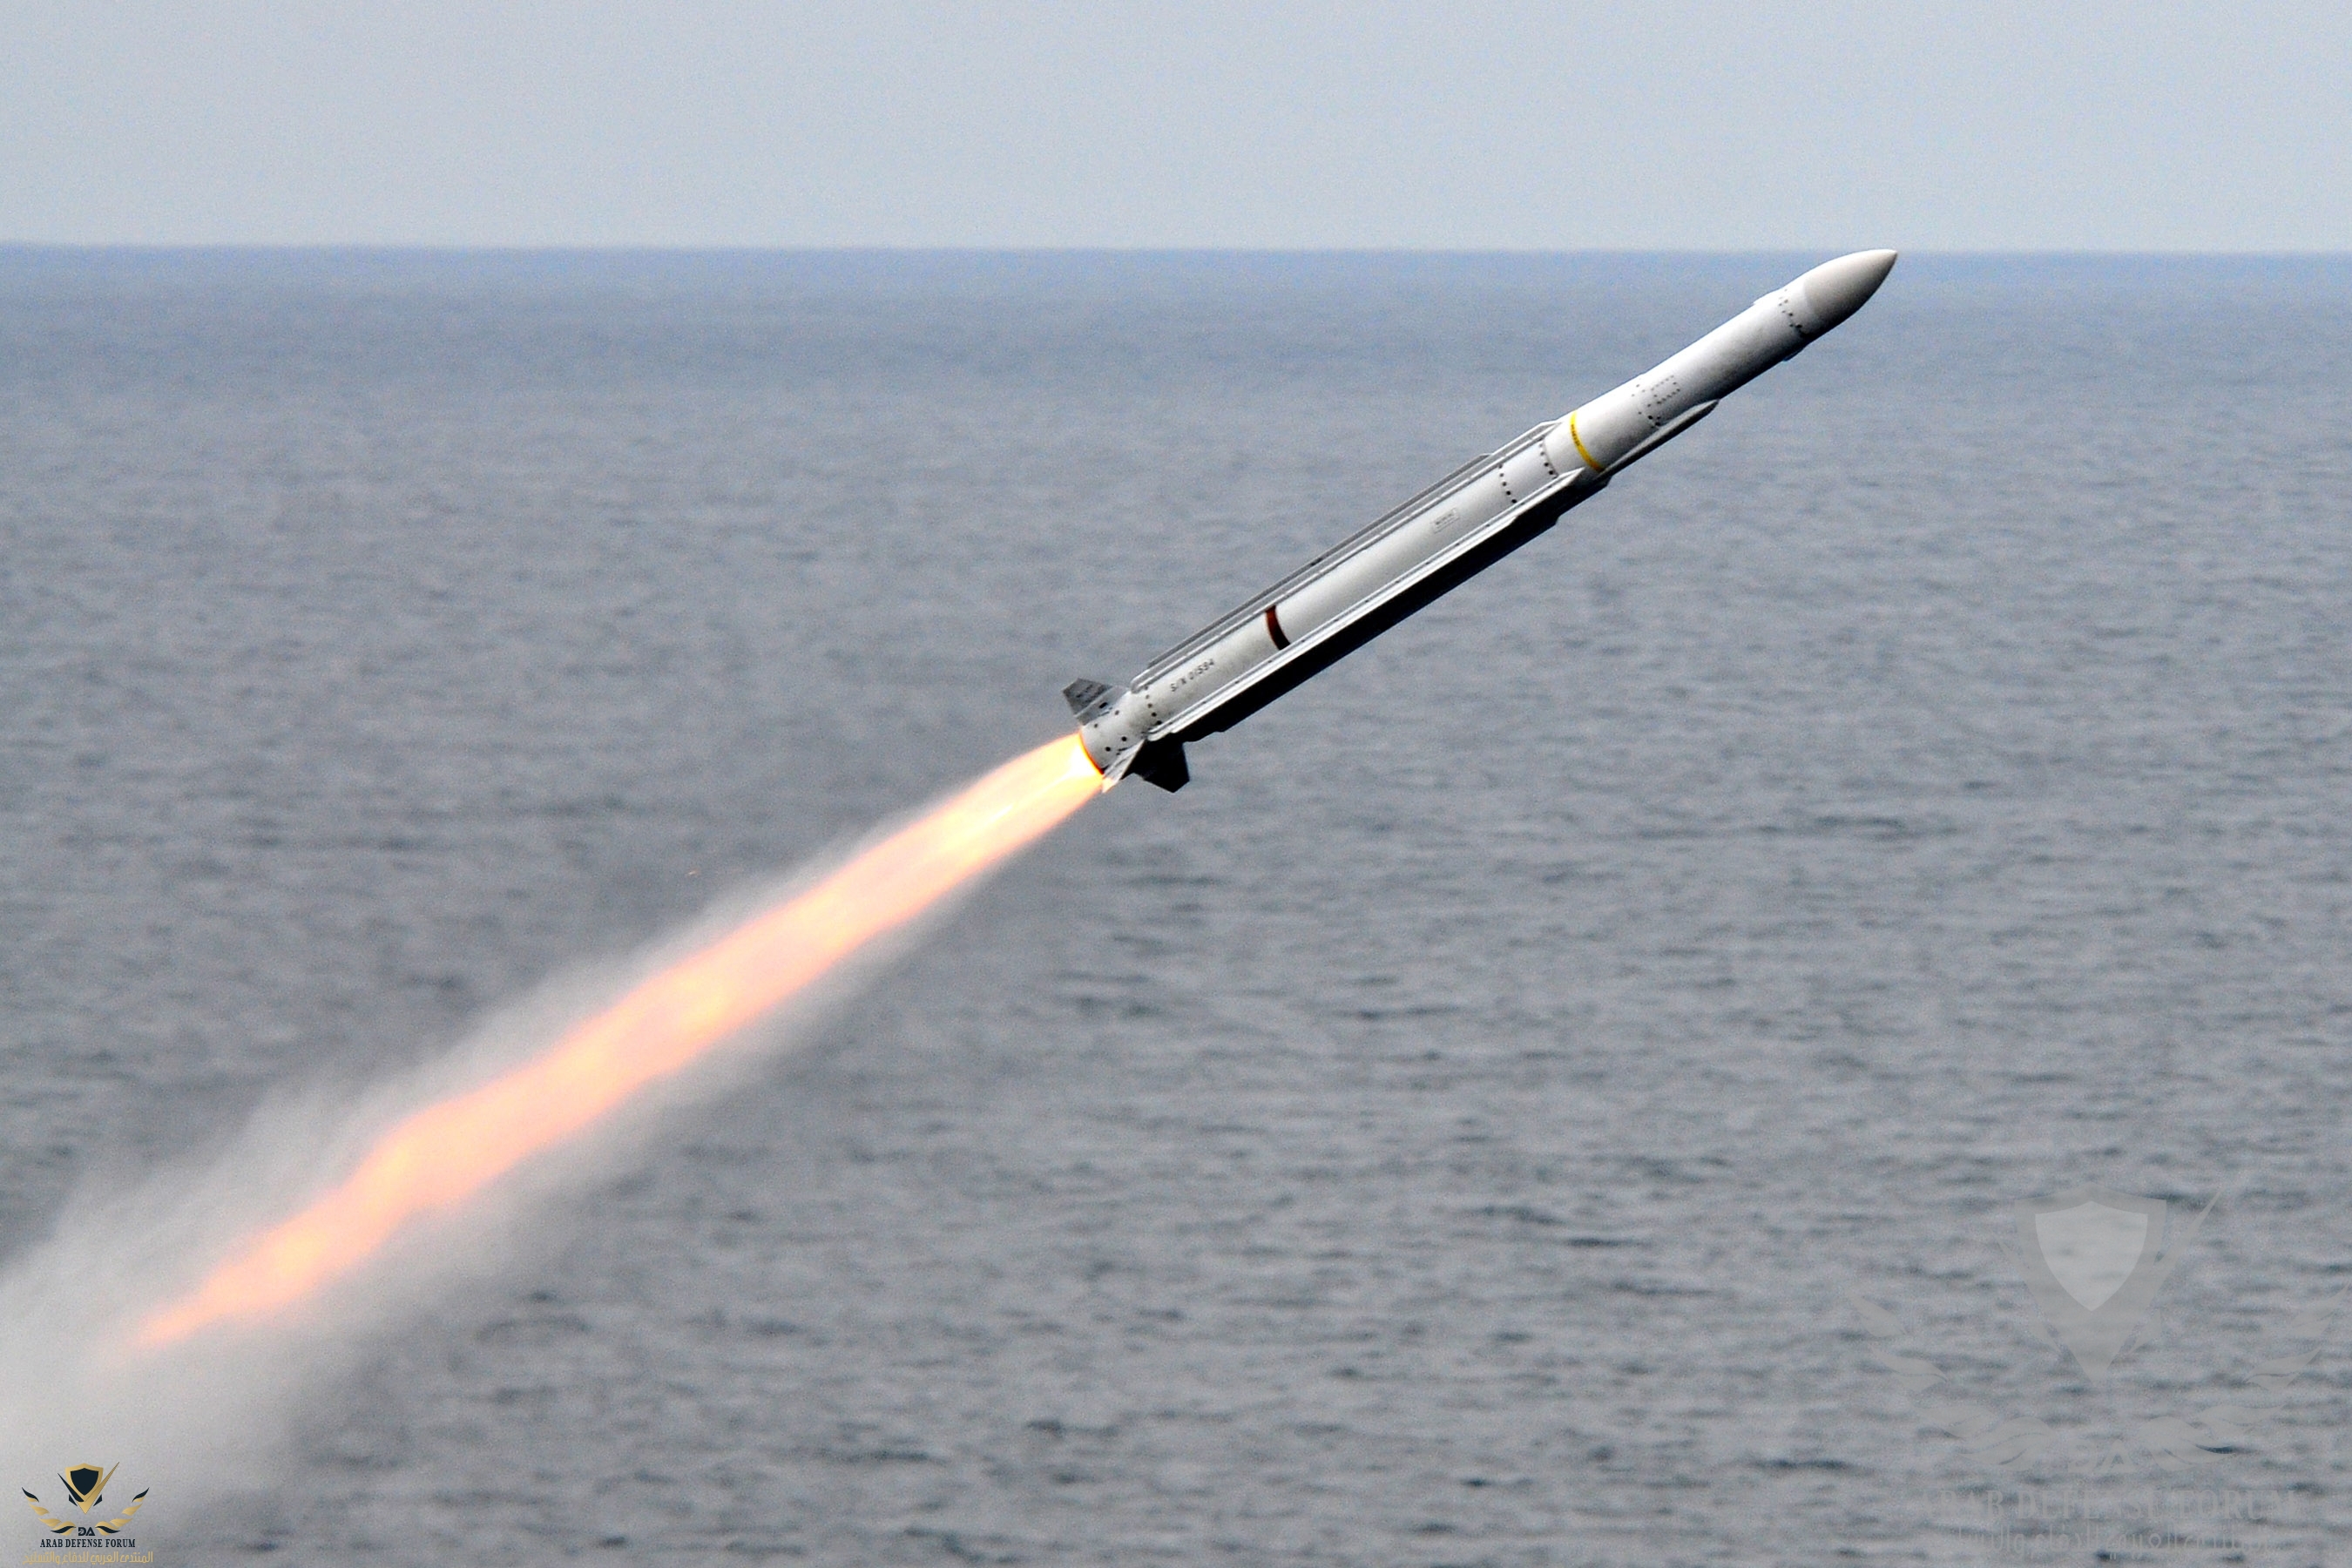 RIM-162_launched_from_USS_Carl_Vinson_(CVN-70)_July_2010.jpg